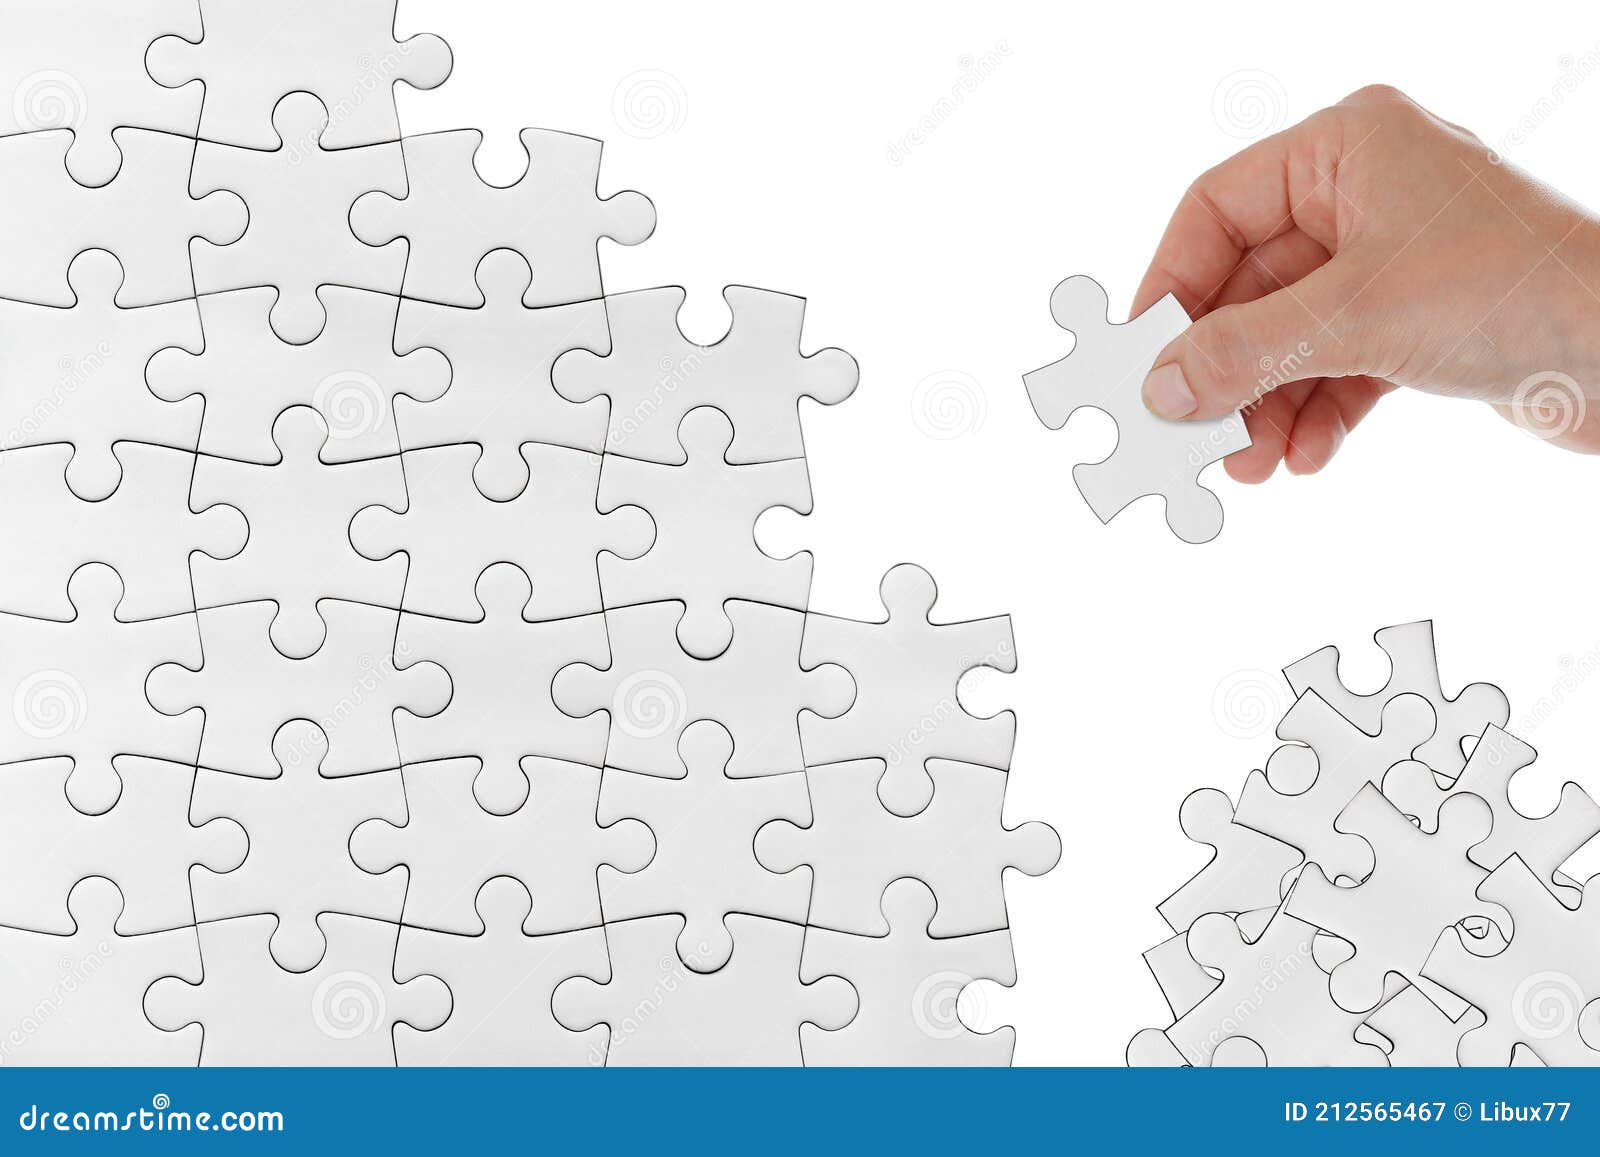 human female hand trying to connect white puzzle piece picking from heap  on white background. doing or making a jigsaw